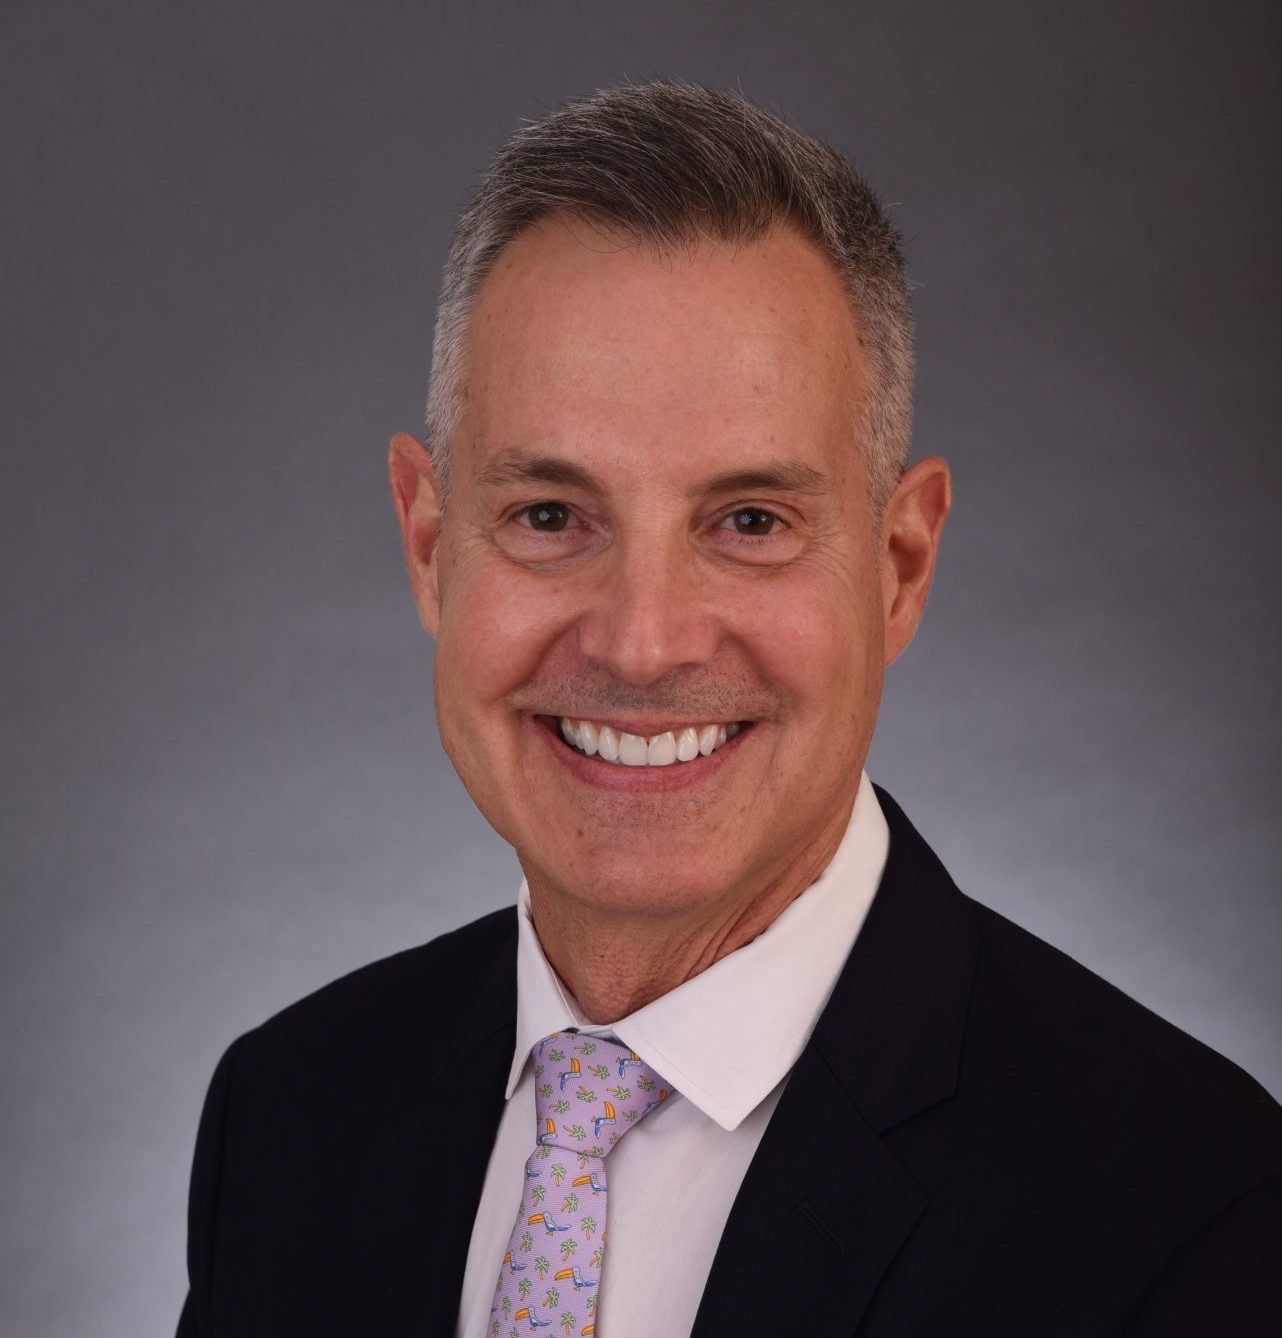 Image of Mark L. McMillen, the Bank's EVP, Chief Operating Officer.